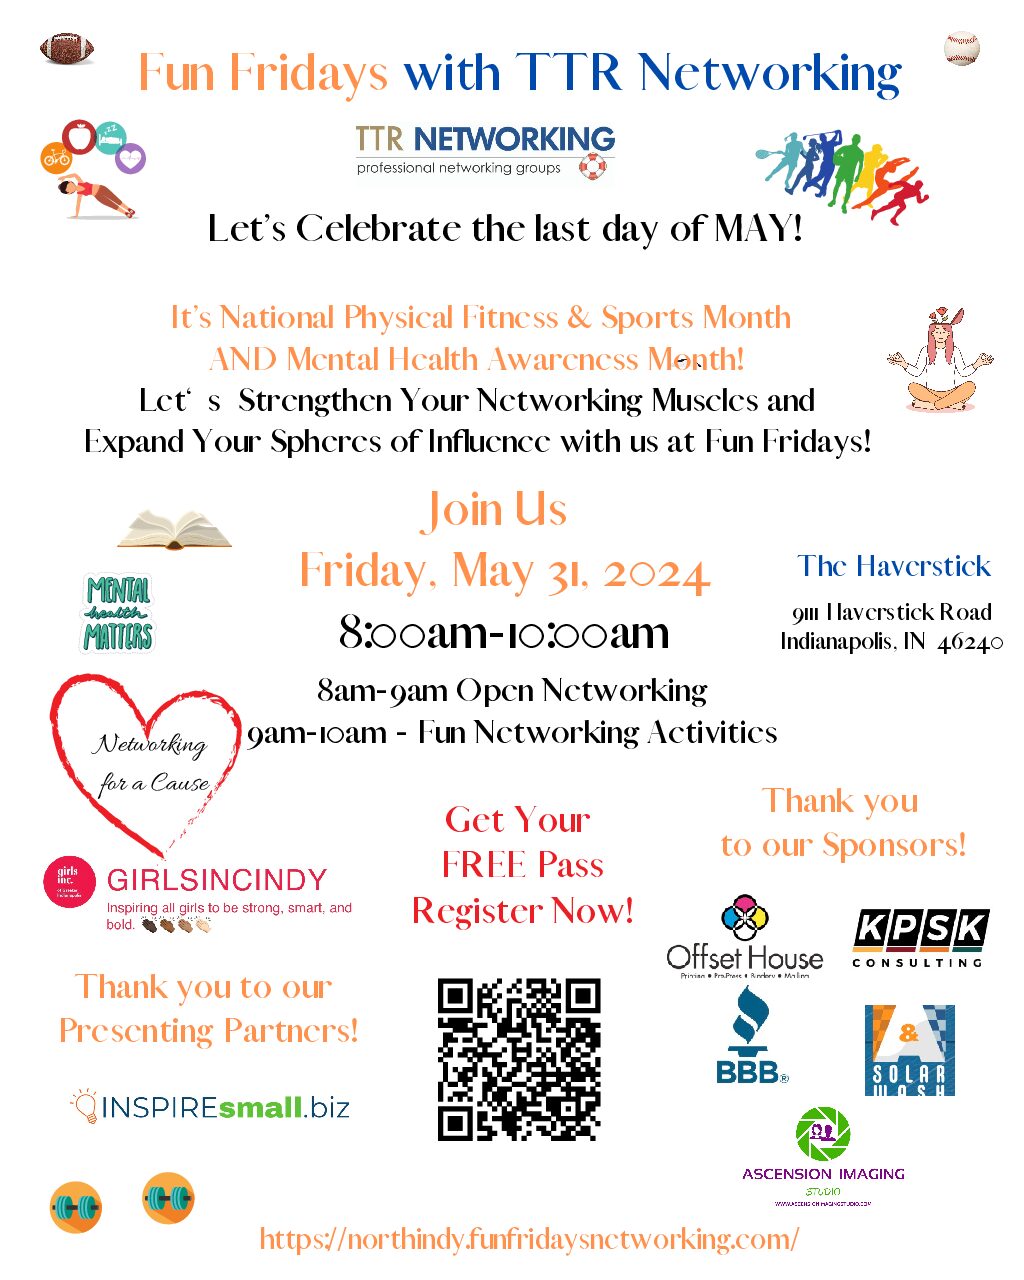 TTR Fun Friday-5/31/24- Celebrate Sports, Physical Fitness and Mental Health Awareness Month with Us!